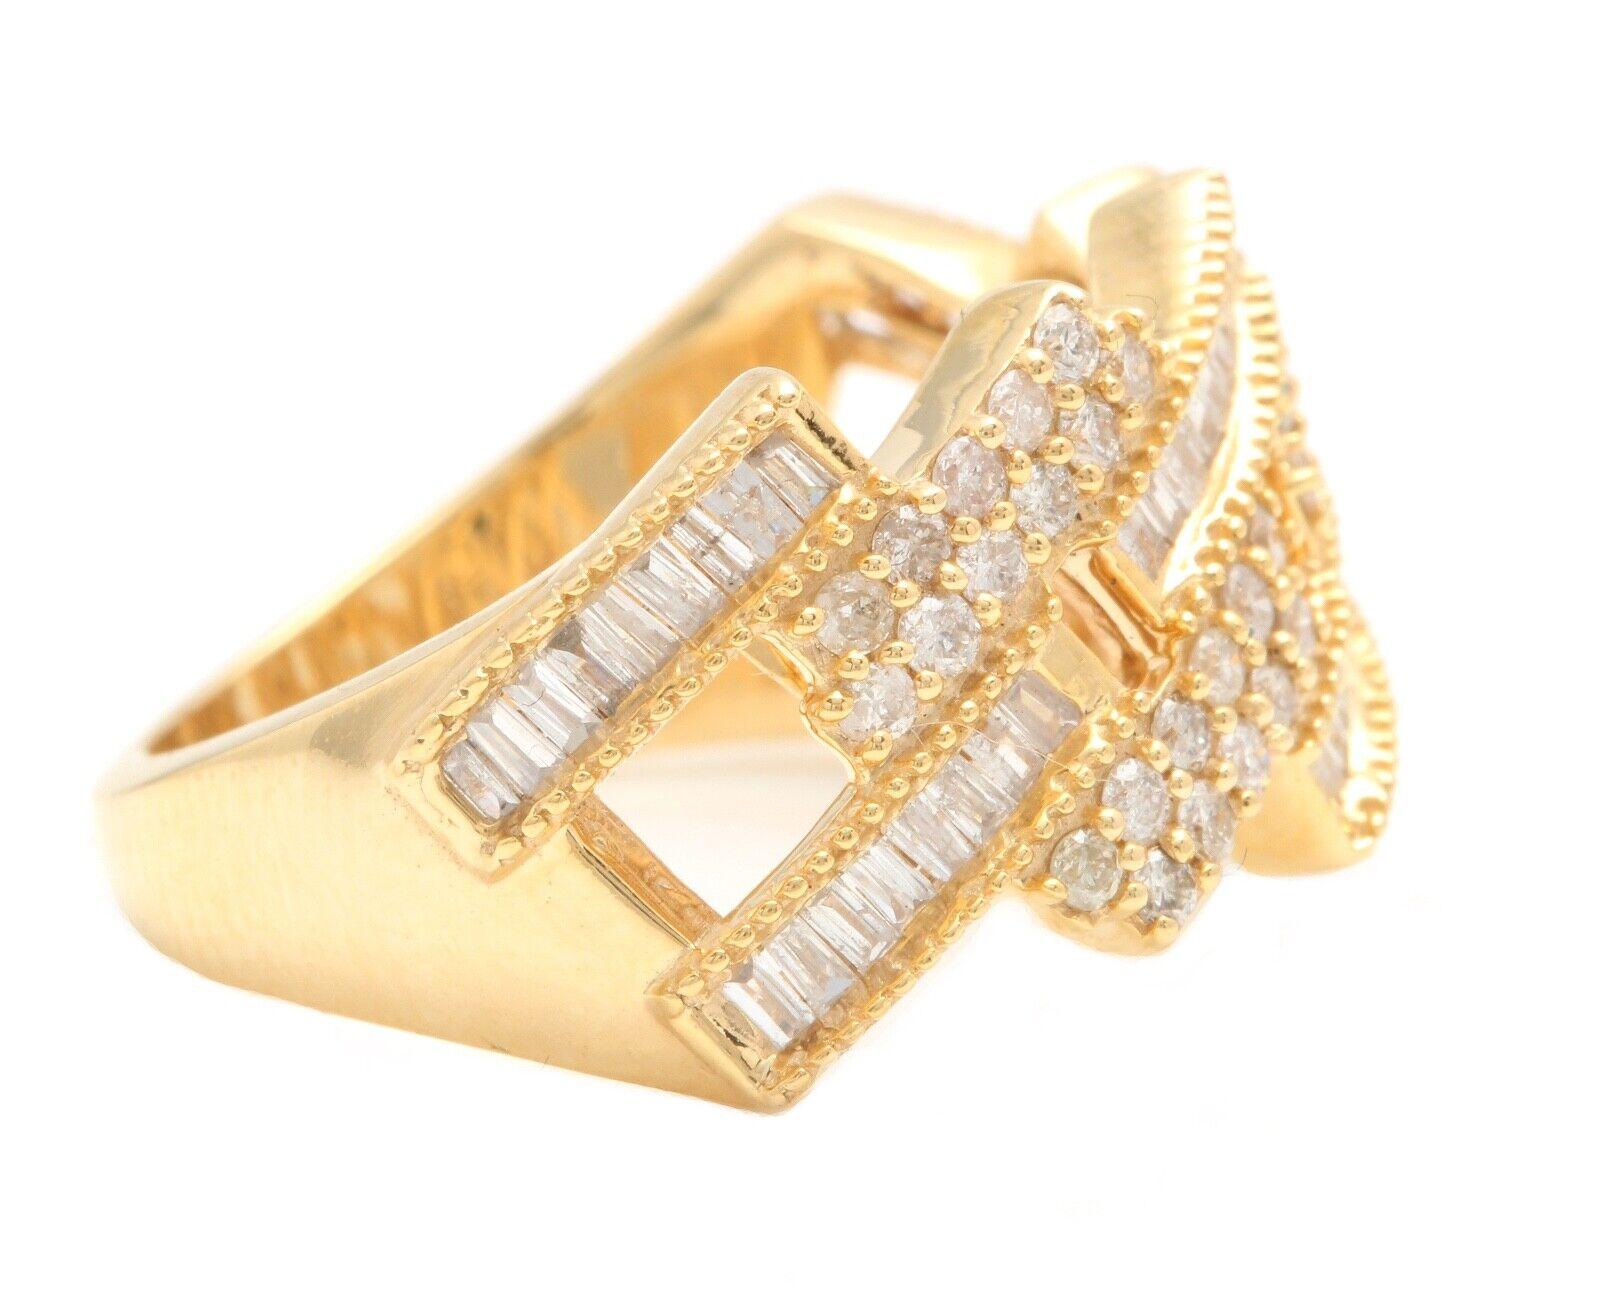 1.15Ct Natural Diamond 10K Solid Yellow Gold Unisex Ring

Amazing looking piece!

Suggested Replacement Value Approx. 5,000.00

Total Natural Round & Baguette Cut Diamonds Weight: Approx. 1.15 Carats (color G-H / Clarity SI-I1)

Width of the ring: